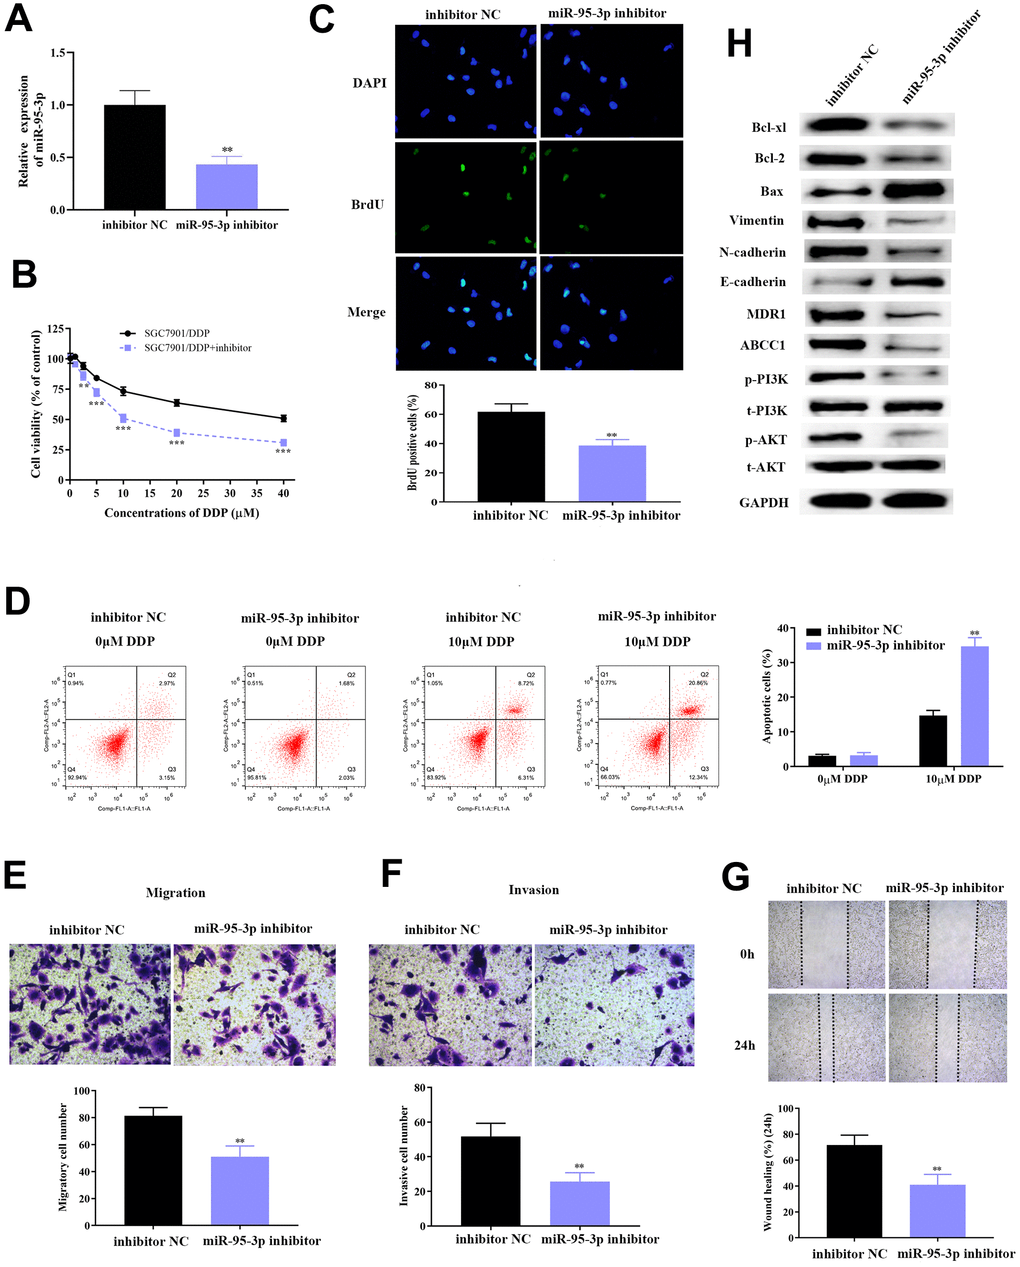 Down-regulation of miR-95-3p leads to decreased cell viability, weakened invasion and migration, and enhanced cell apoptosis. (A) Treatment with miR-95-3p inhibitor led to a decrease in expression of miR-95-3p. (B) MTT assay demonstrated that lower miR-95-3p levels led to weakened cell survival rate of DDP-resistant SGC7901. (C) BrdU assay results indicated that down-regulation of miR-95-3p reduced cell viability of DDP-resistant SGC7901. (D) Cellular apoptosis rate of DDP-resistant SGC7901. (E, F) Transwell assay results demonstrated lower cell invasion and metastasis of DDP-resistant SGC7901 upon down-regulation of miR-95-3p. (G) Wound healing assay suggested that down-regulation of miR-95-3p led to decreased invasion in DDP-resistant SGC7901. (H) Western blot assay helped examine the down-stream regulatory proteins of miR-95-3p. ***p